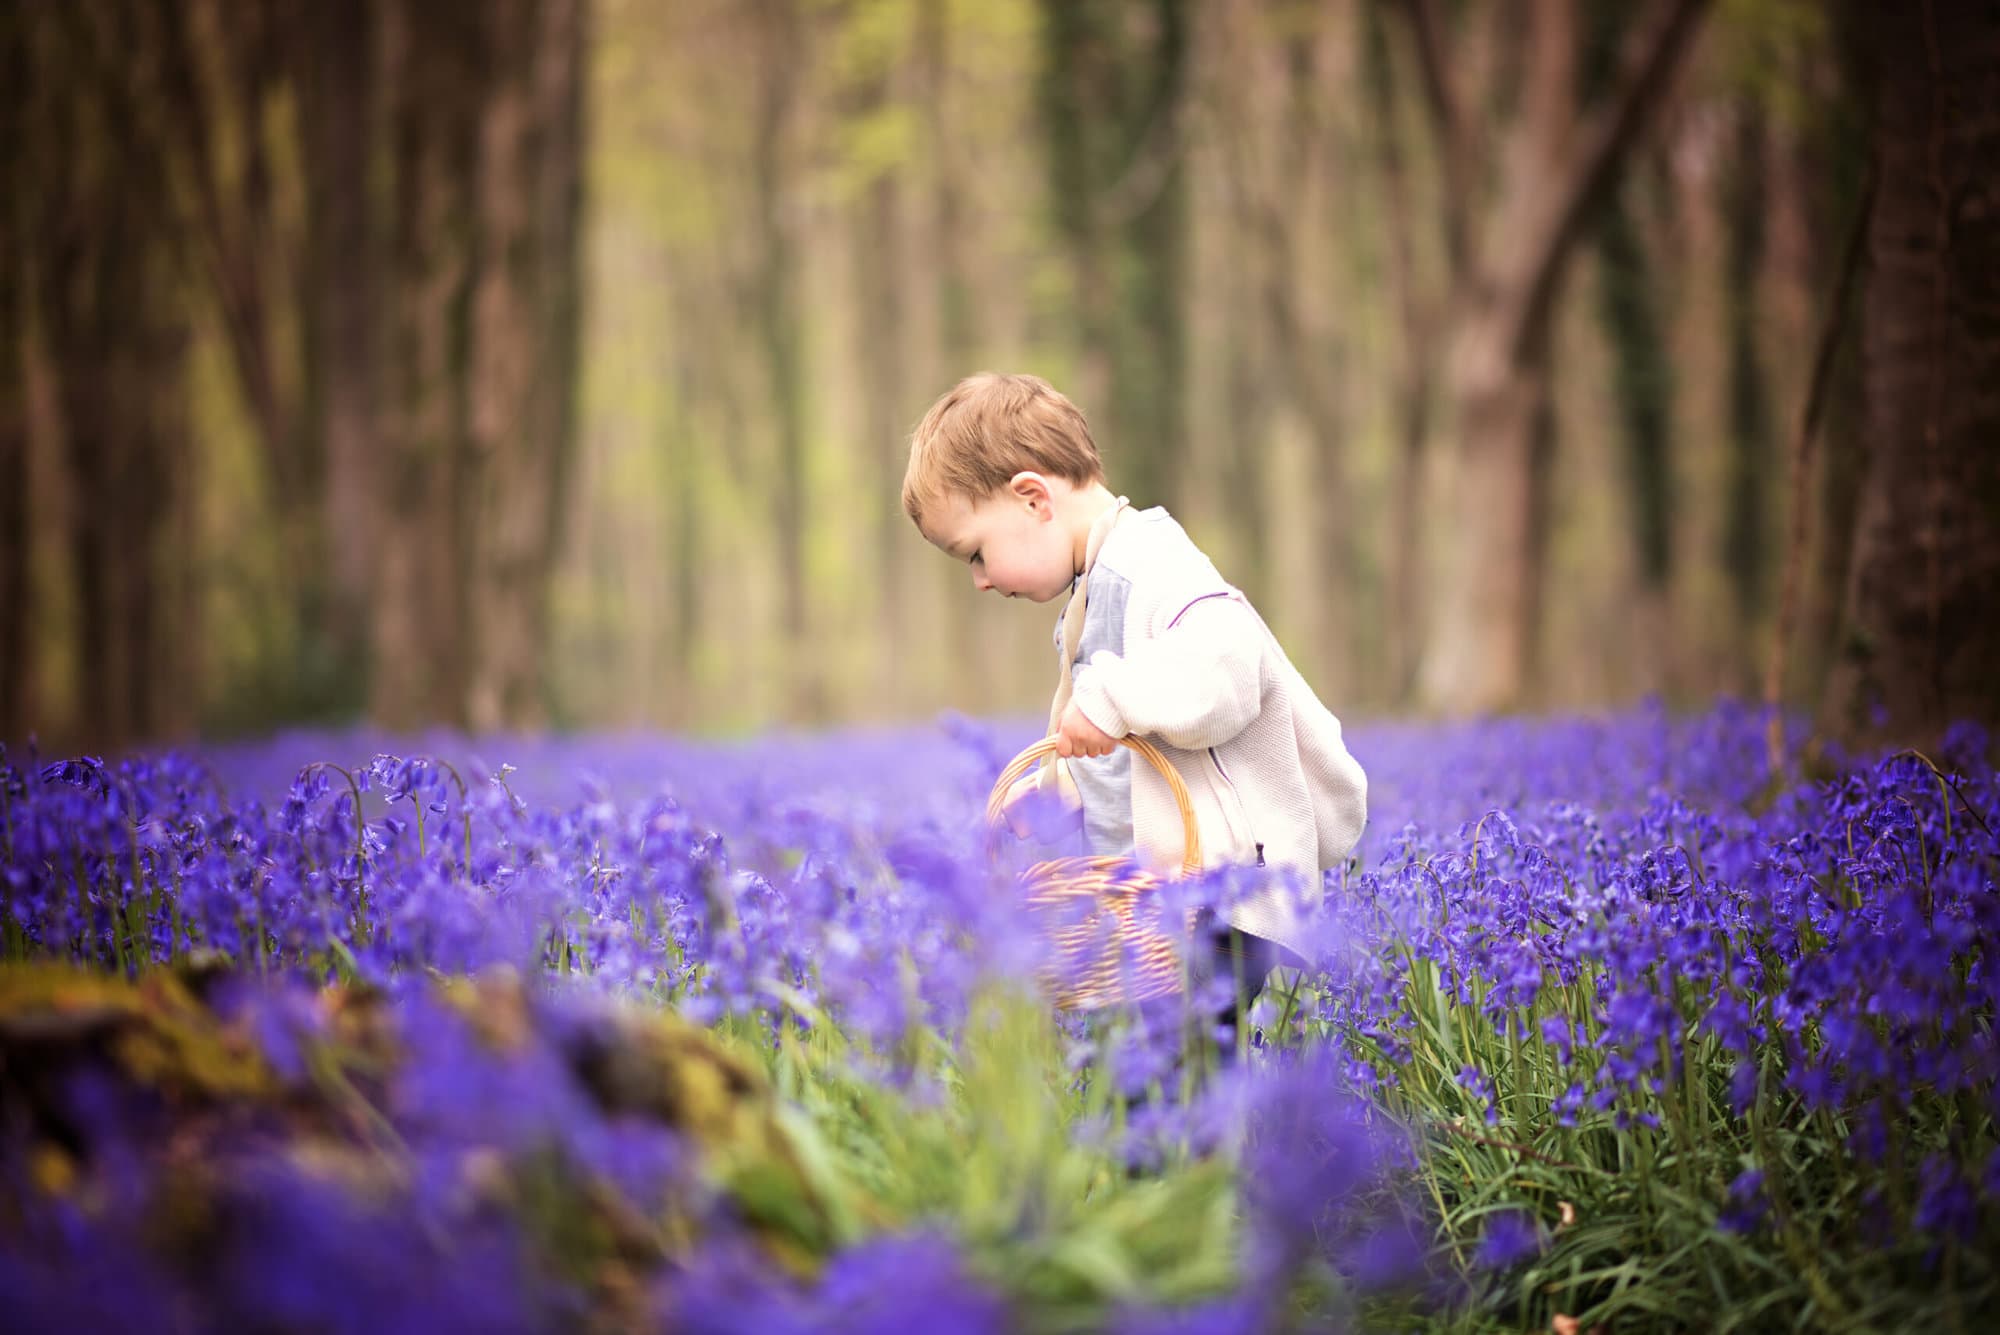 Bluebell photography examples 